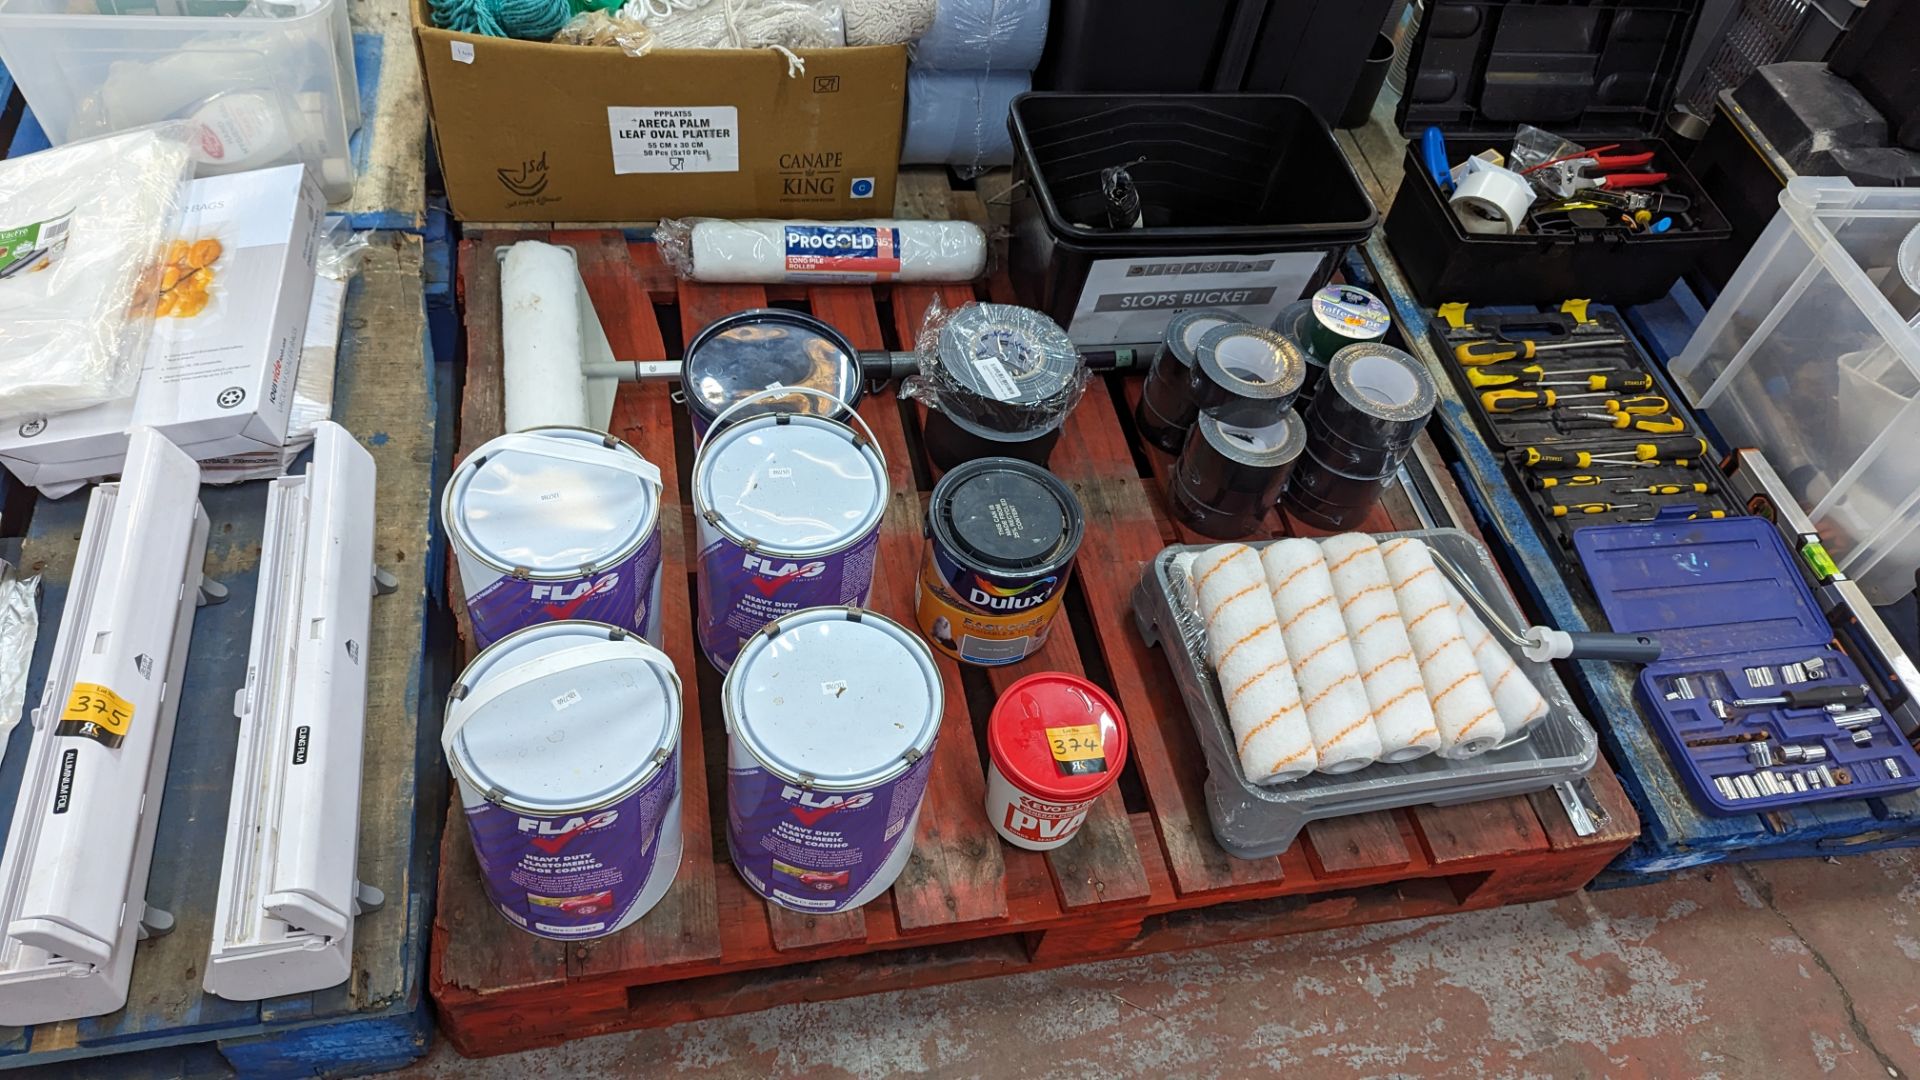 The contents of a pallet of decorating items including paint rollers, paint, tape & more - Image 10 of 10